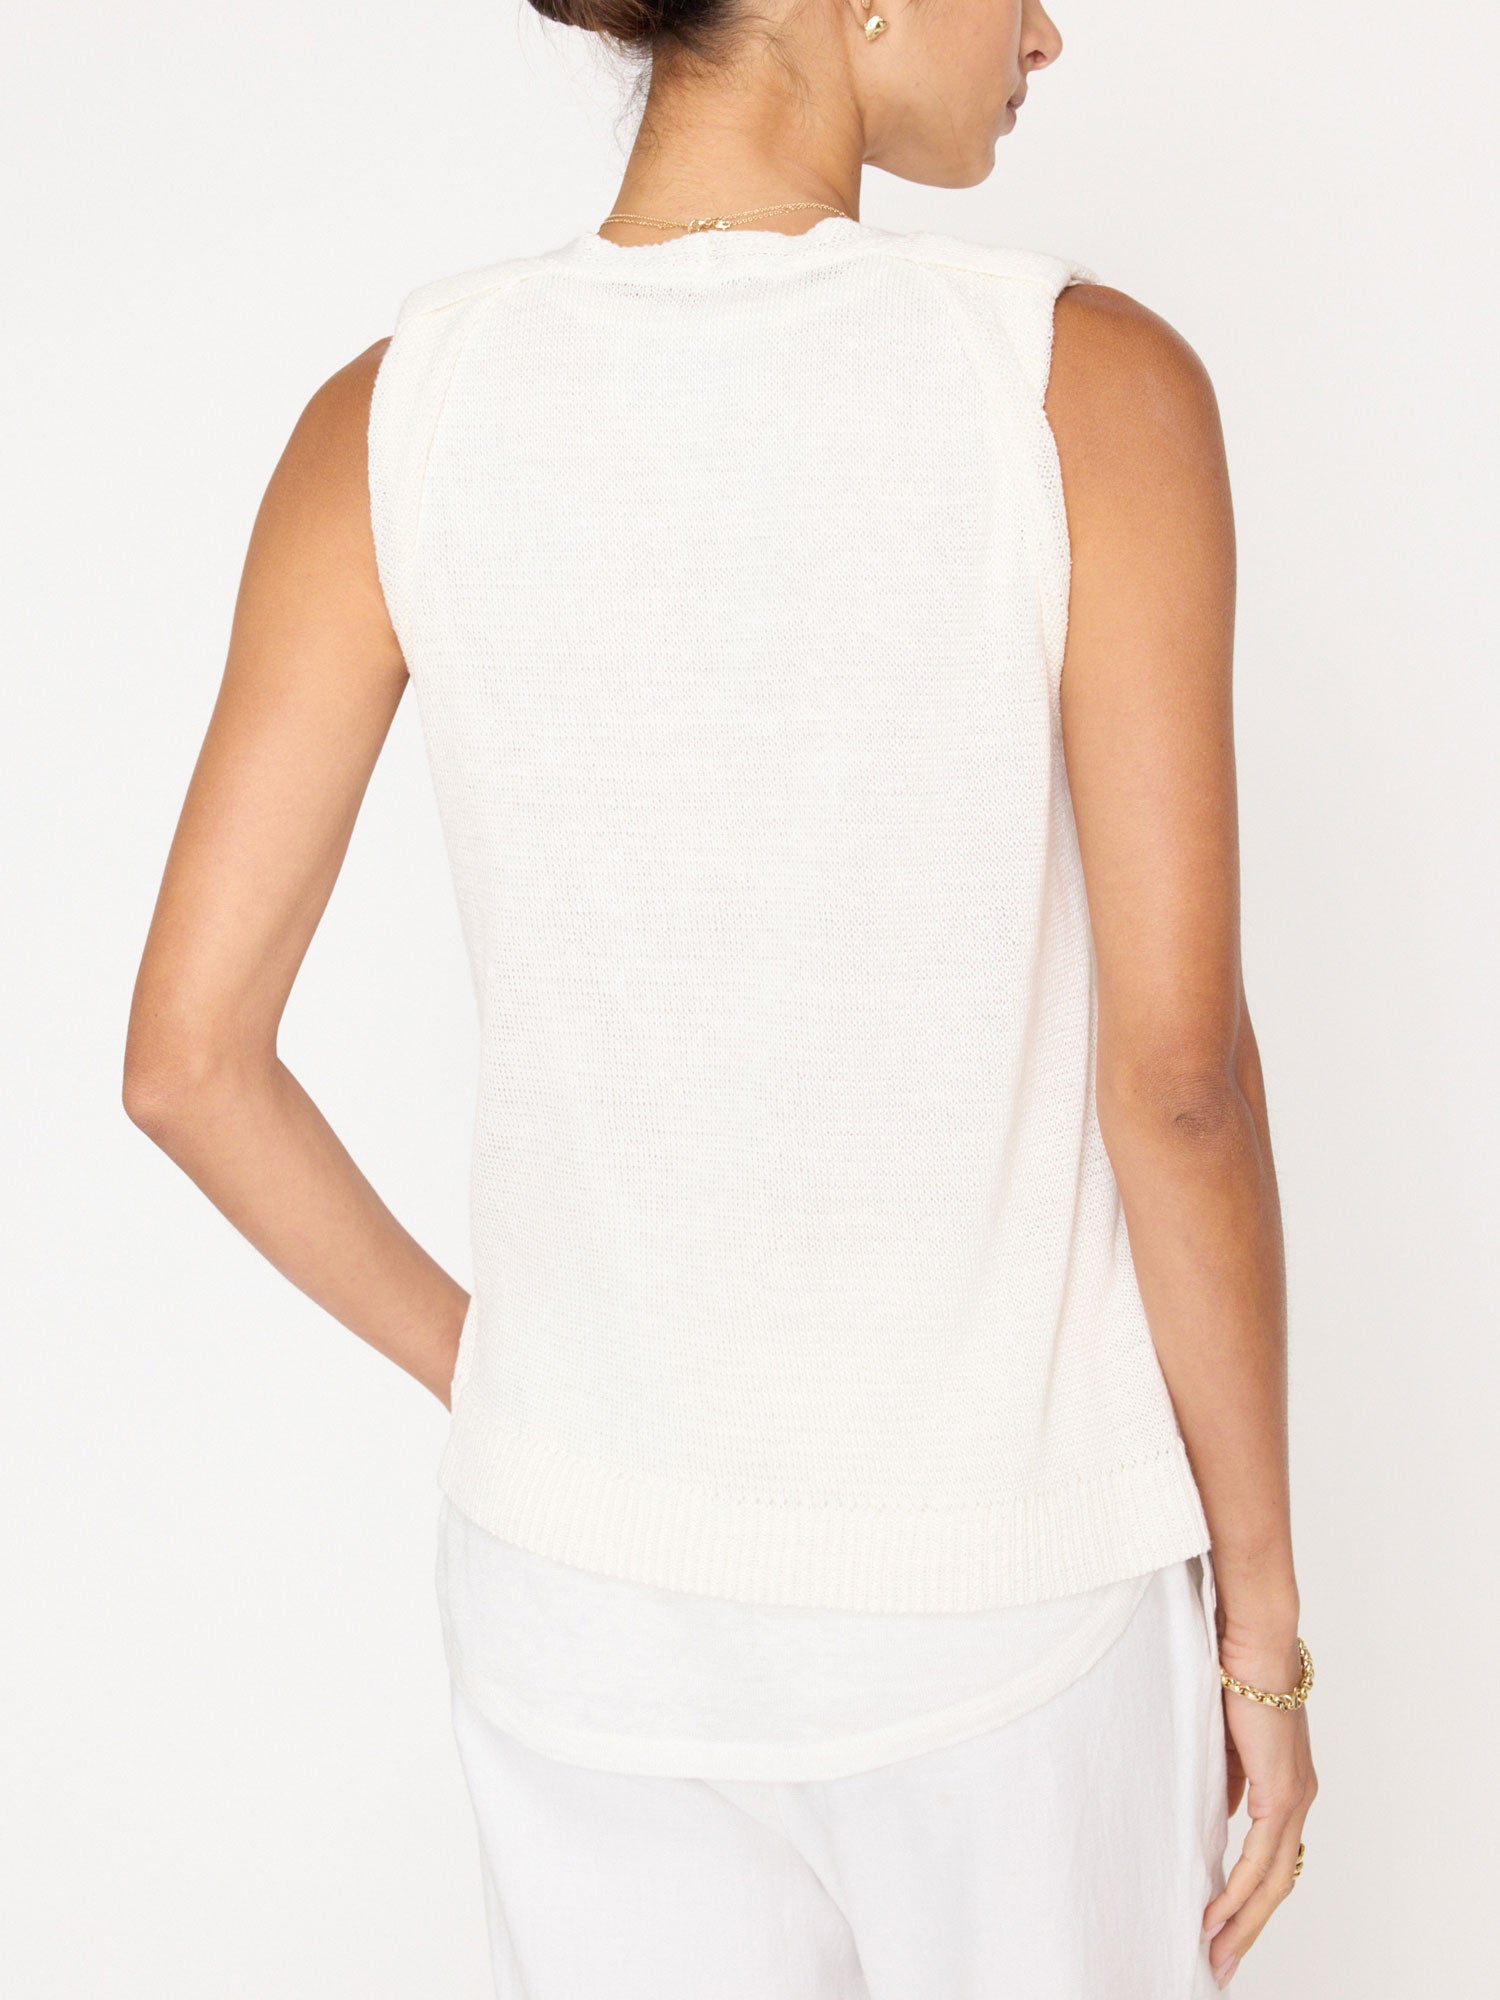 Morrow white layered V-neck tank top back view